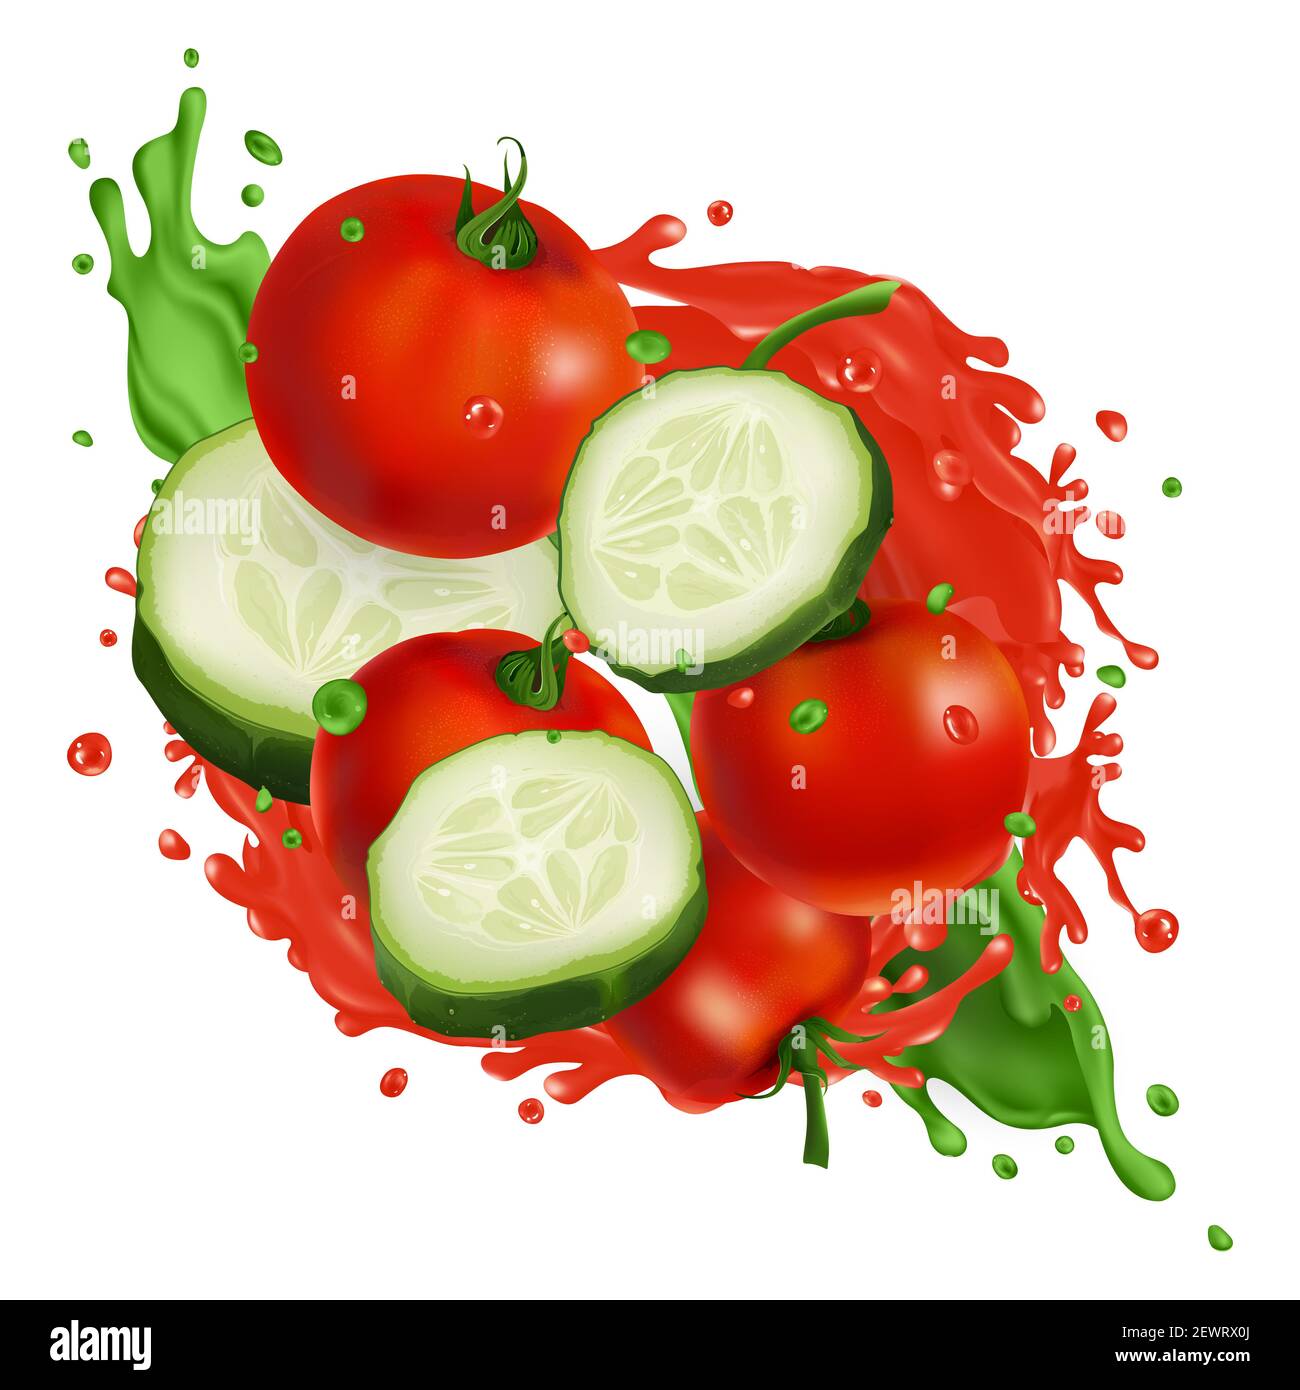 Cherry tomatoes and cucumber slices in splashes of vegetable juice Stock Photo